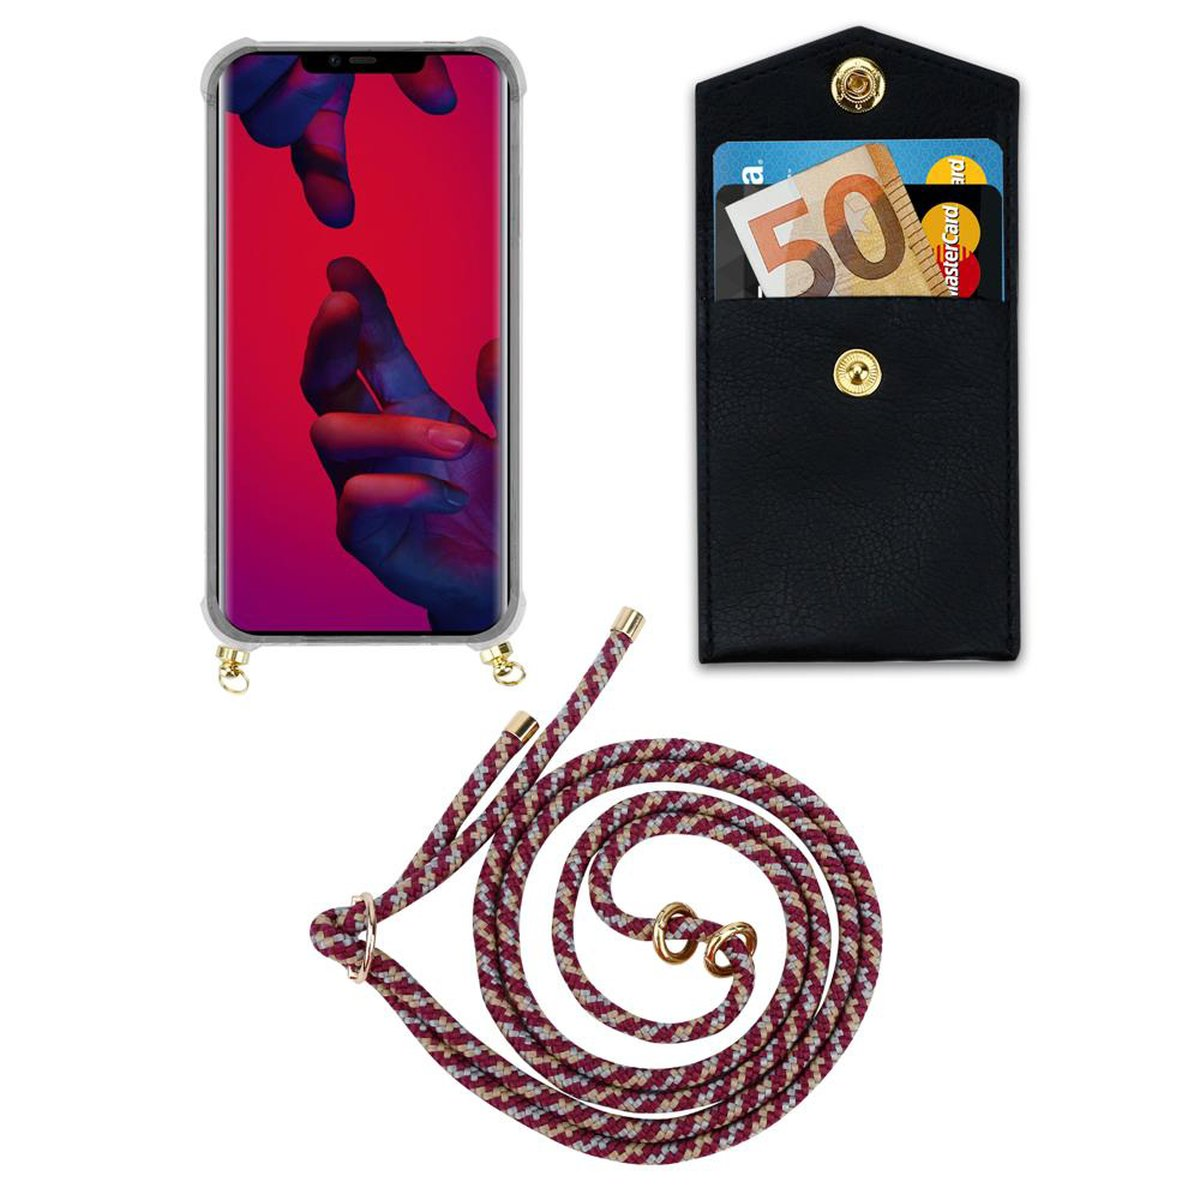 CADORABO Handy Kette mit Gold Hülle, MATE PRO, Band und WEIß ROT Huawei, abnehmbarer Backcover, 20 Ringen, Kordel GELB